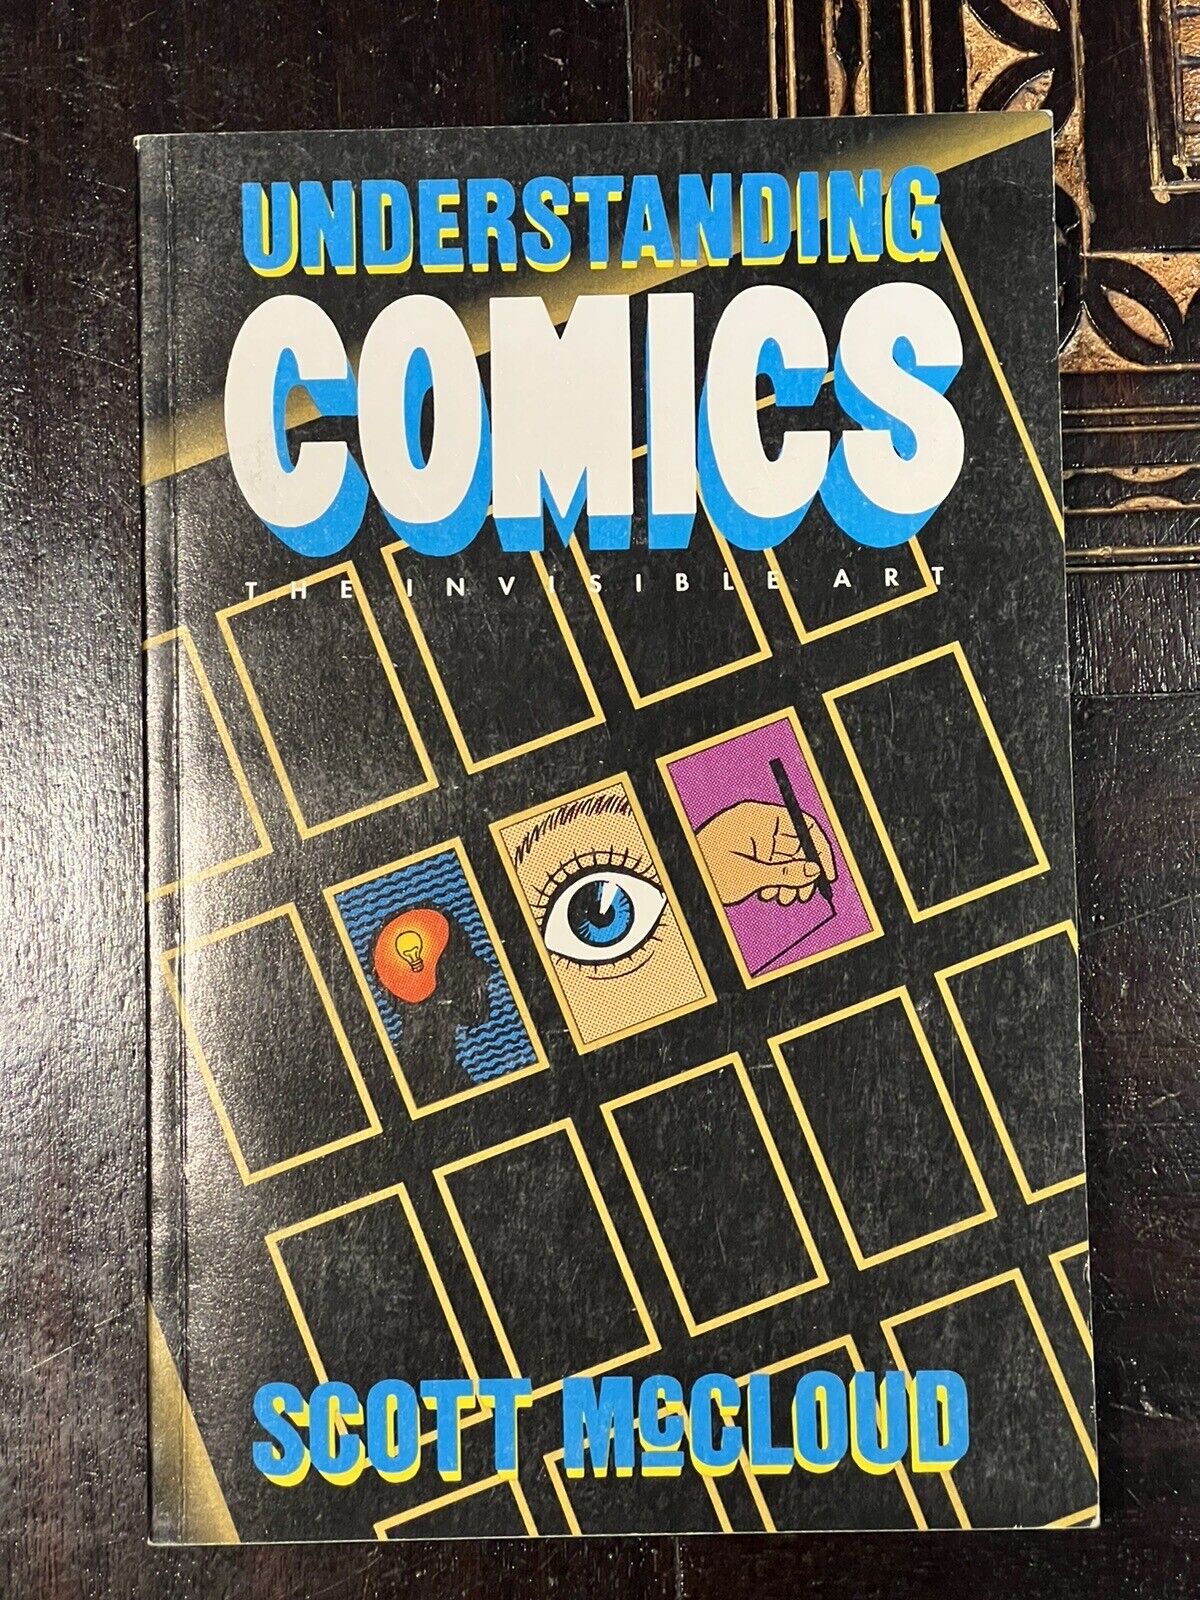 UNDERSTANDING COMICS THE INVISIBLE ART Gold Edition by Scott McCloud